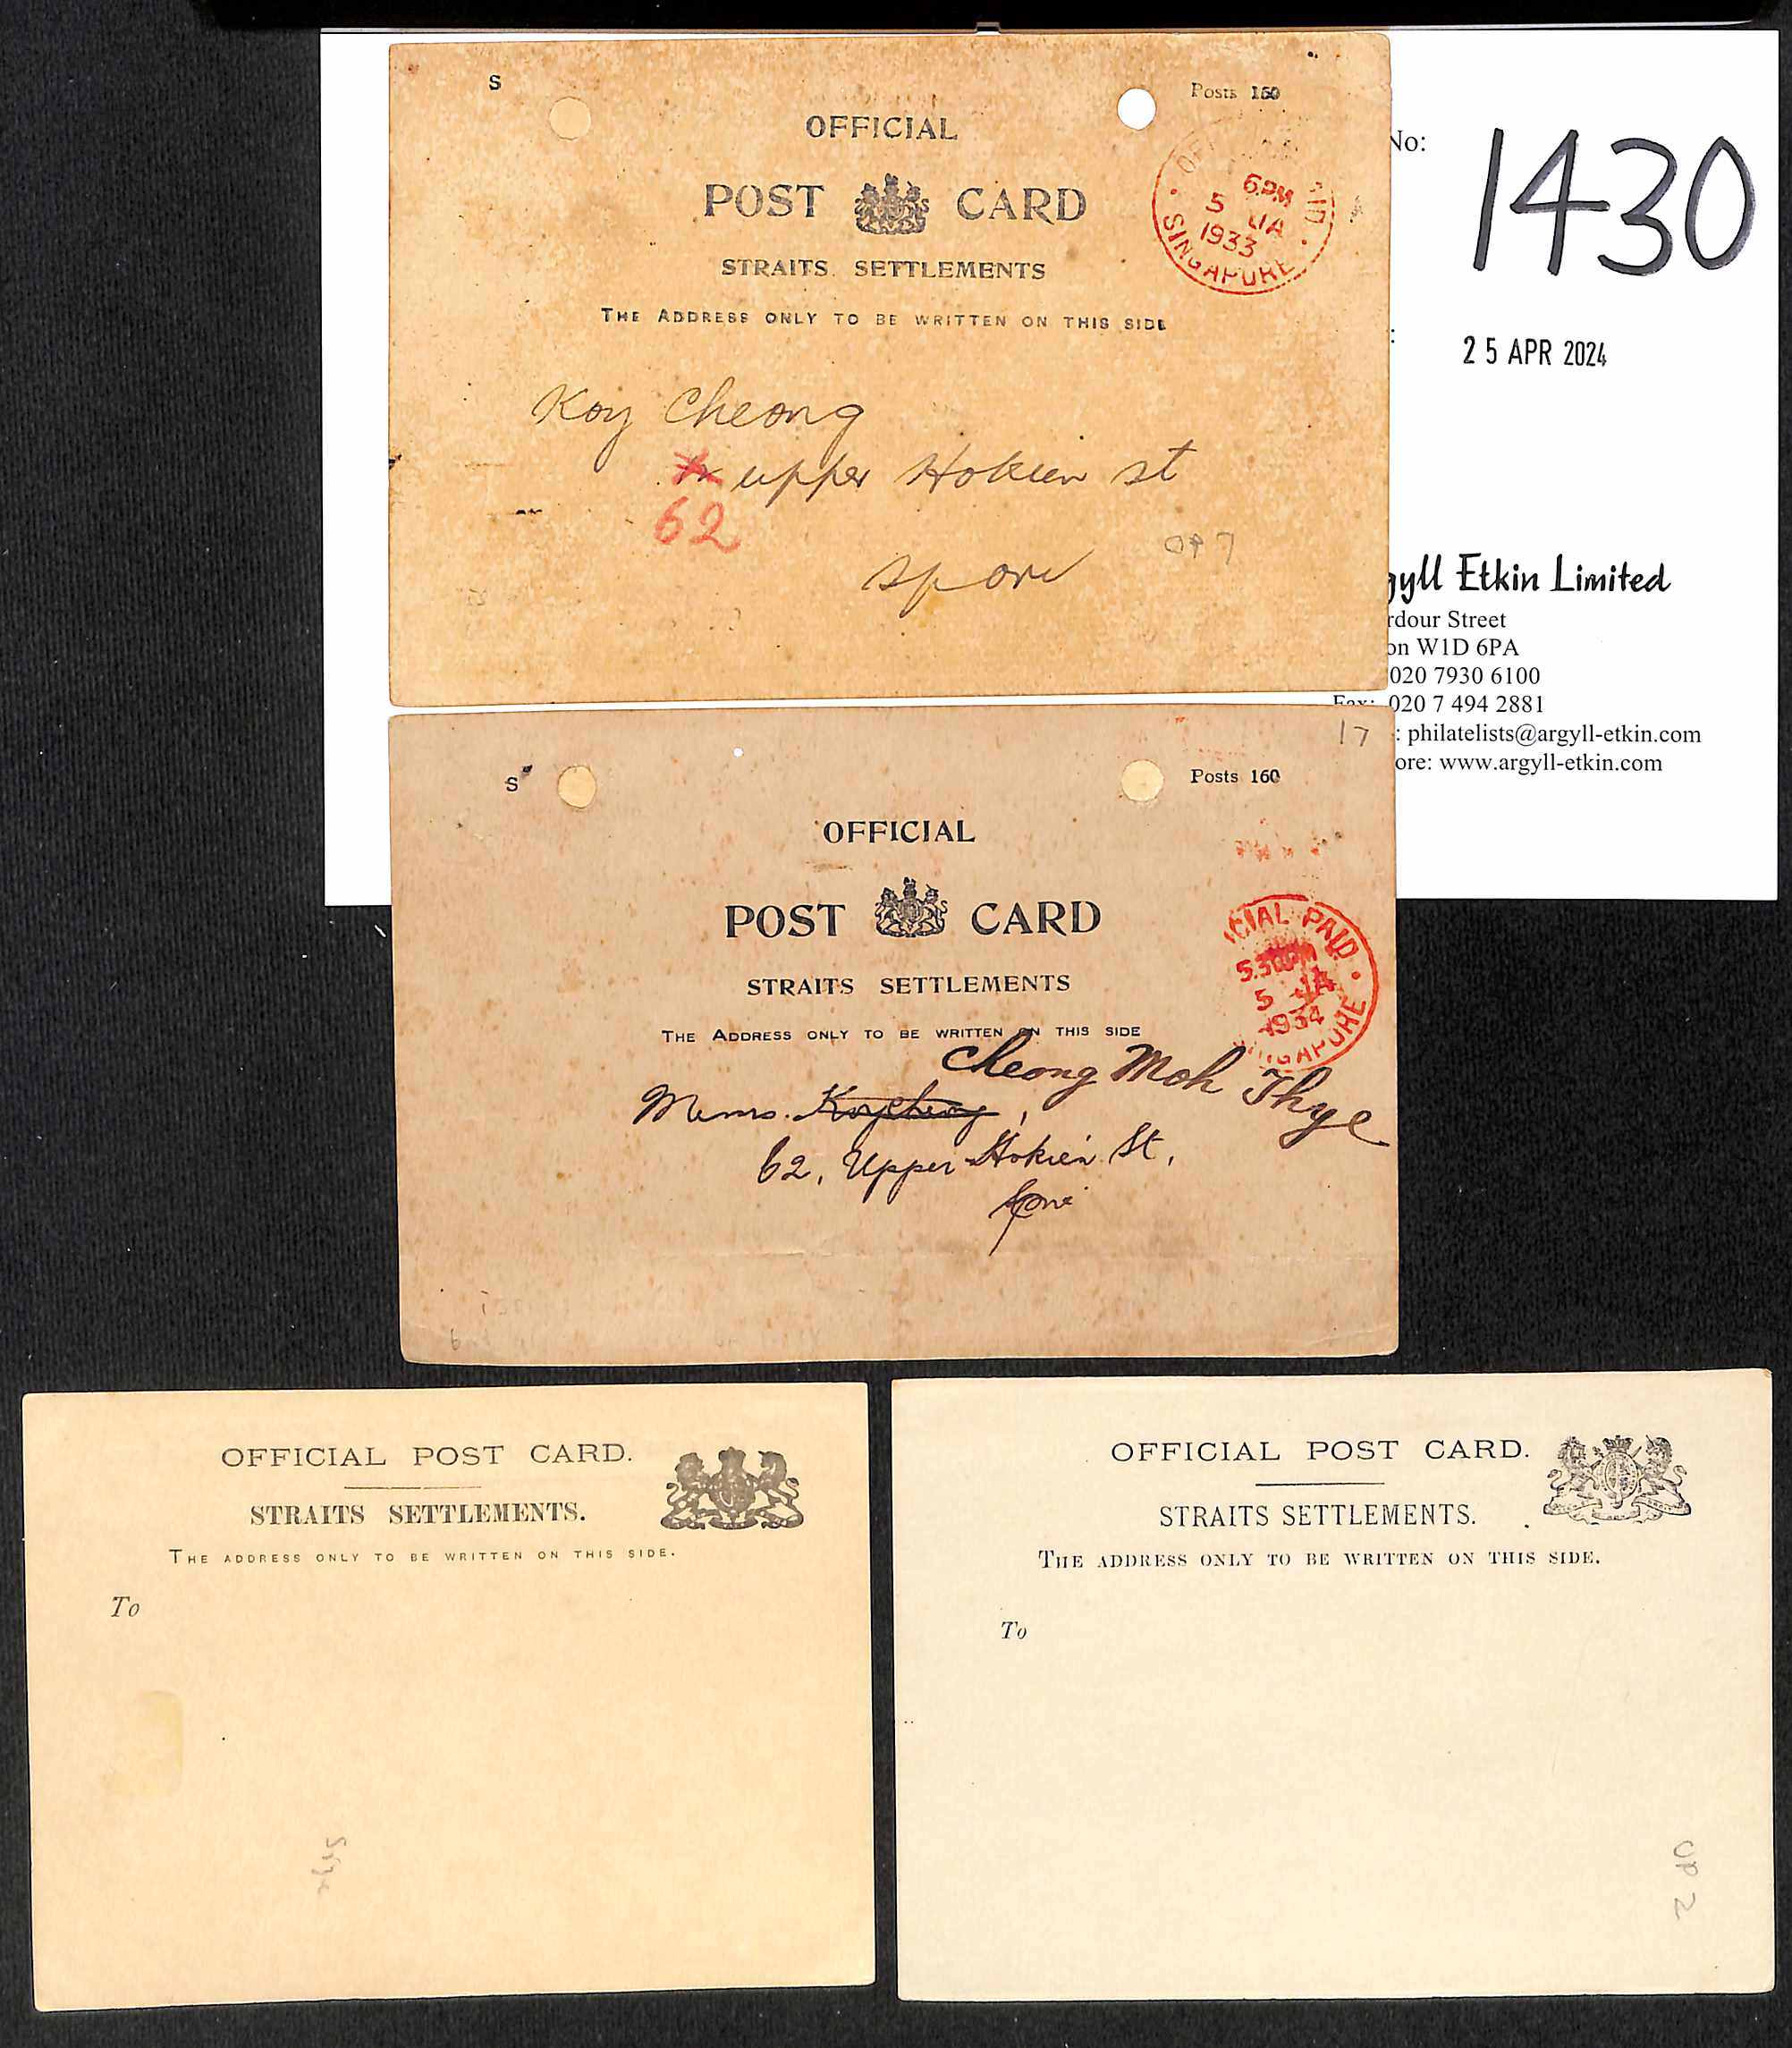 c.1895 Official Post Cards, large royal arms at right, differing fount types used for the heading